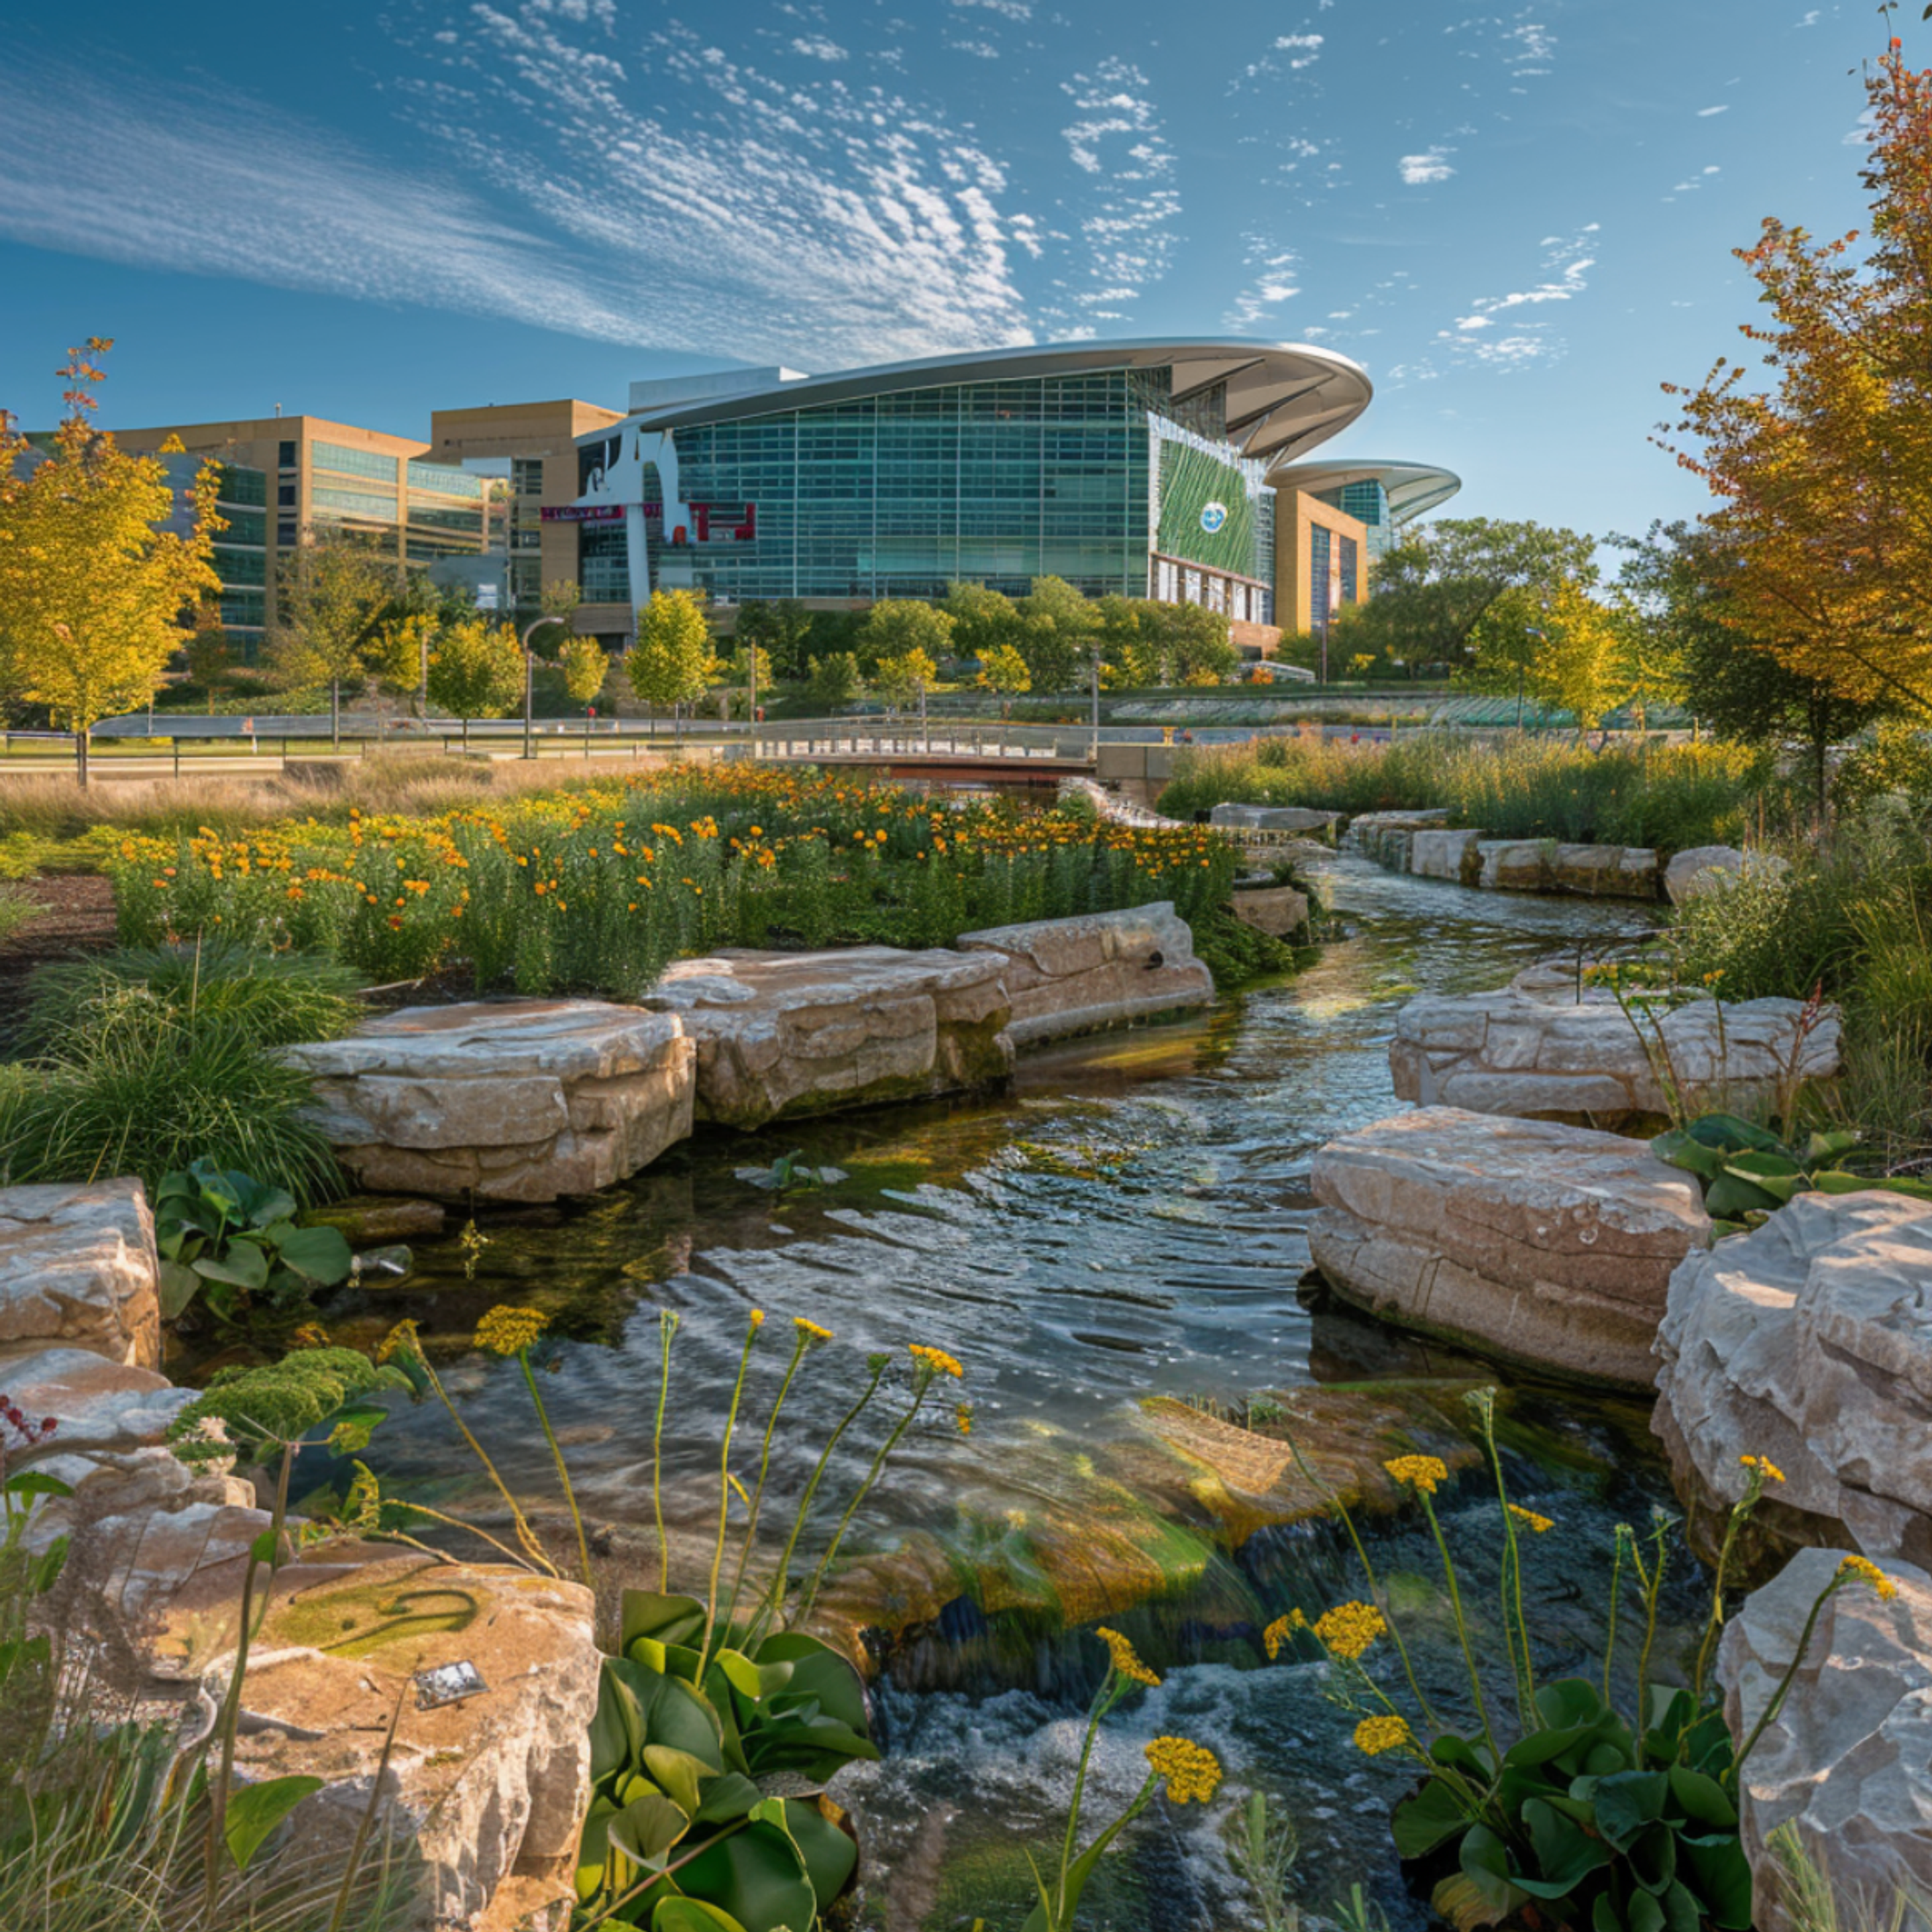 Summer day at the Titletown district in Green Bay, Wisconsin, with a naturalistic stream and native plants in the foreground leading to the iconic Lambeau Field, home of the Green Bay Packers, symbolizing the city's love for football and the outdoors.